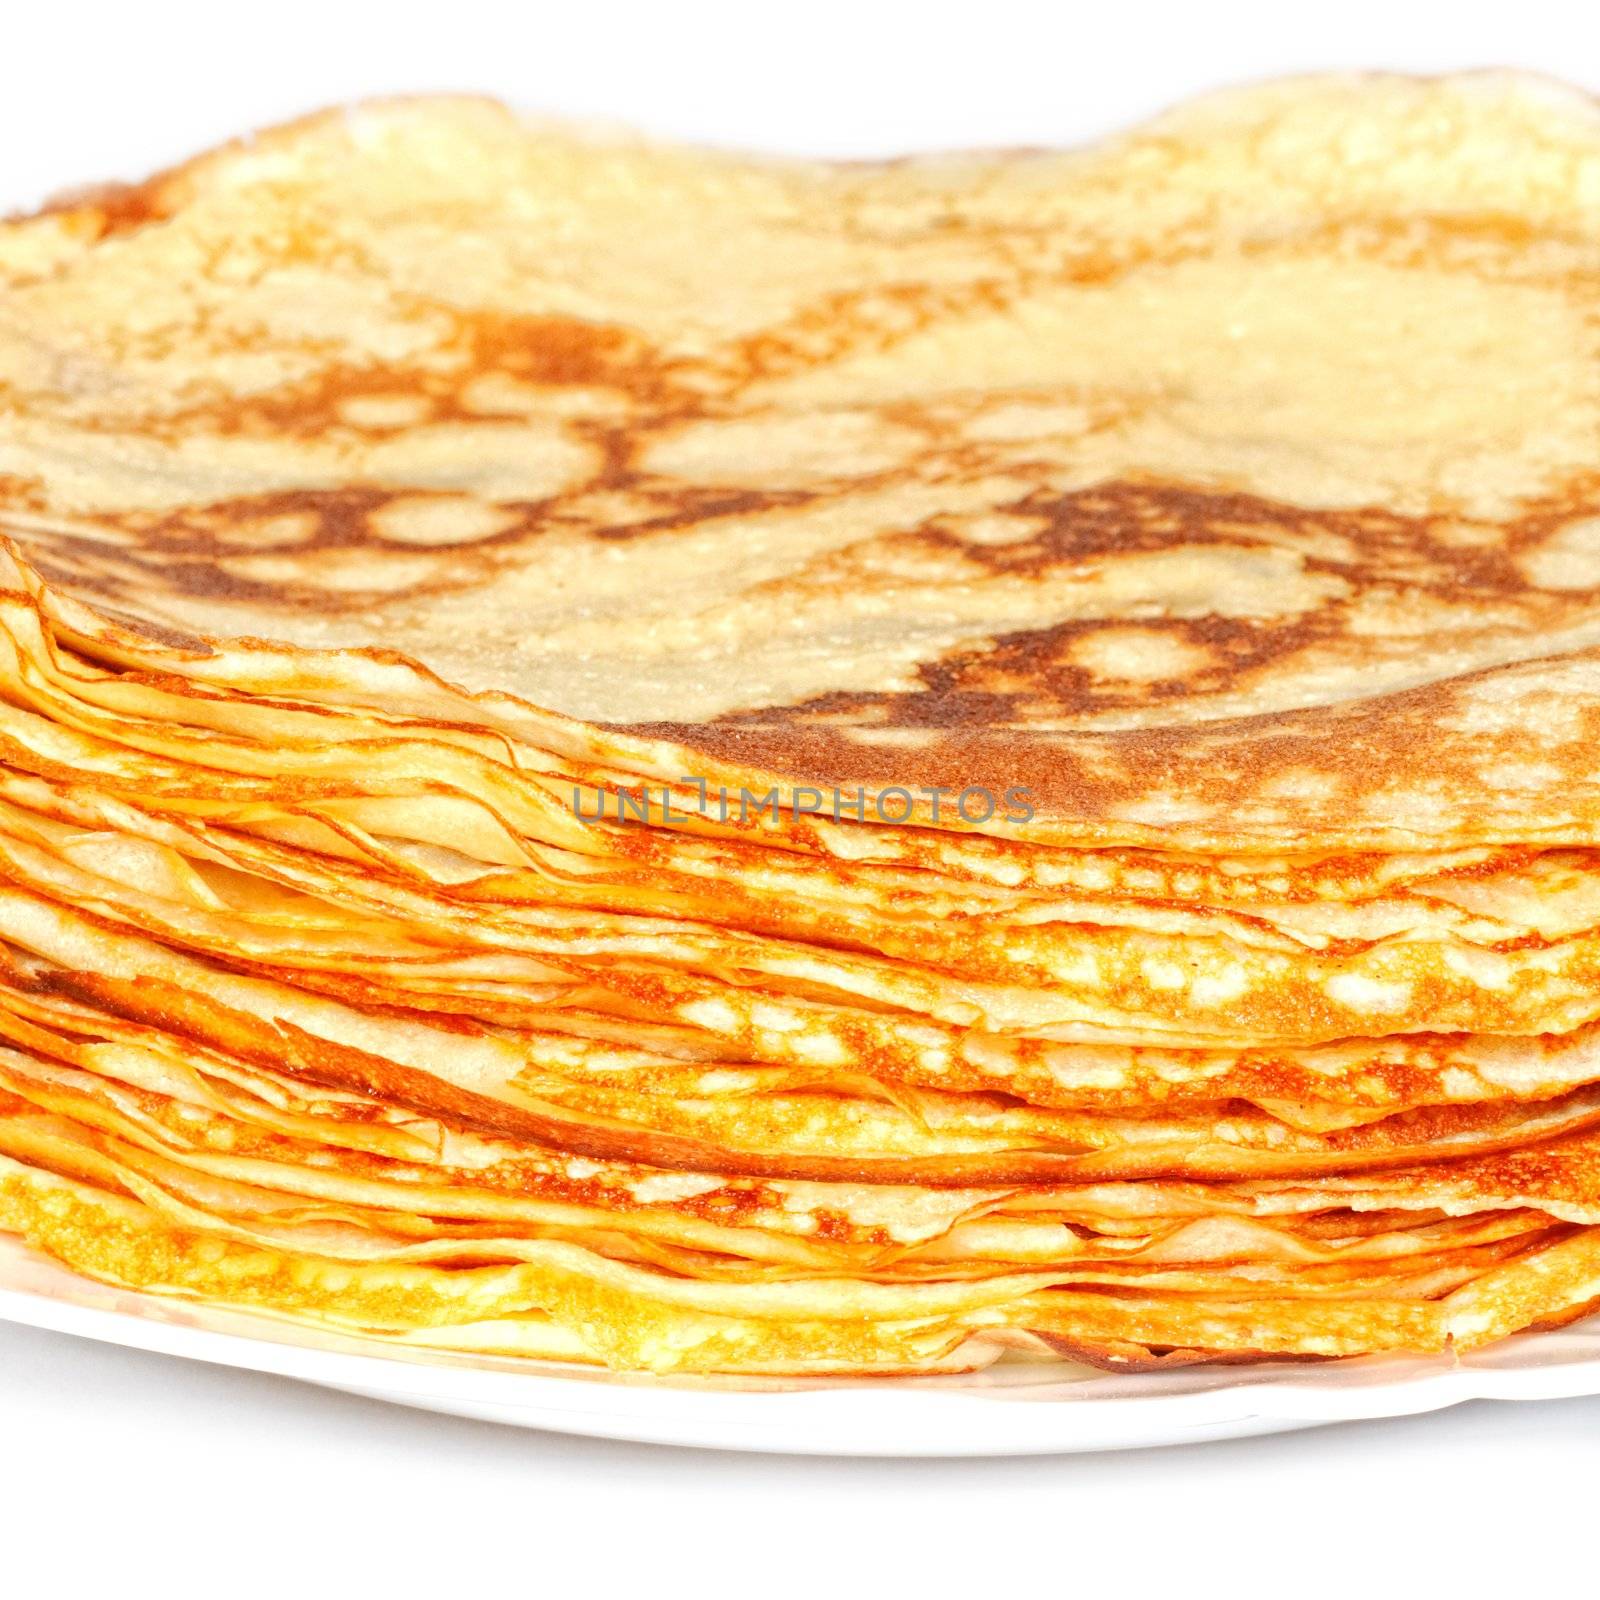 stack of pancakes on the plate